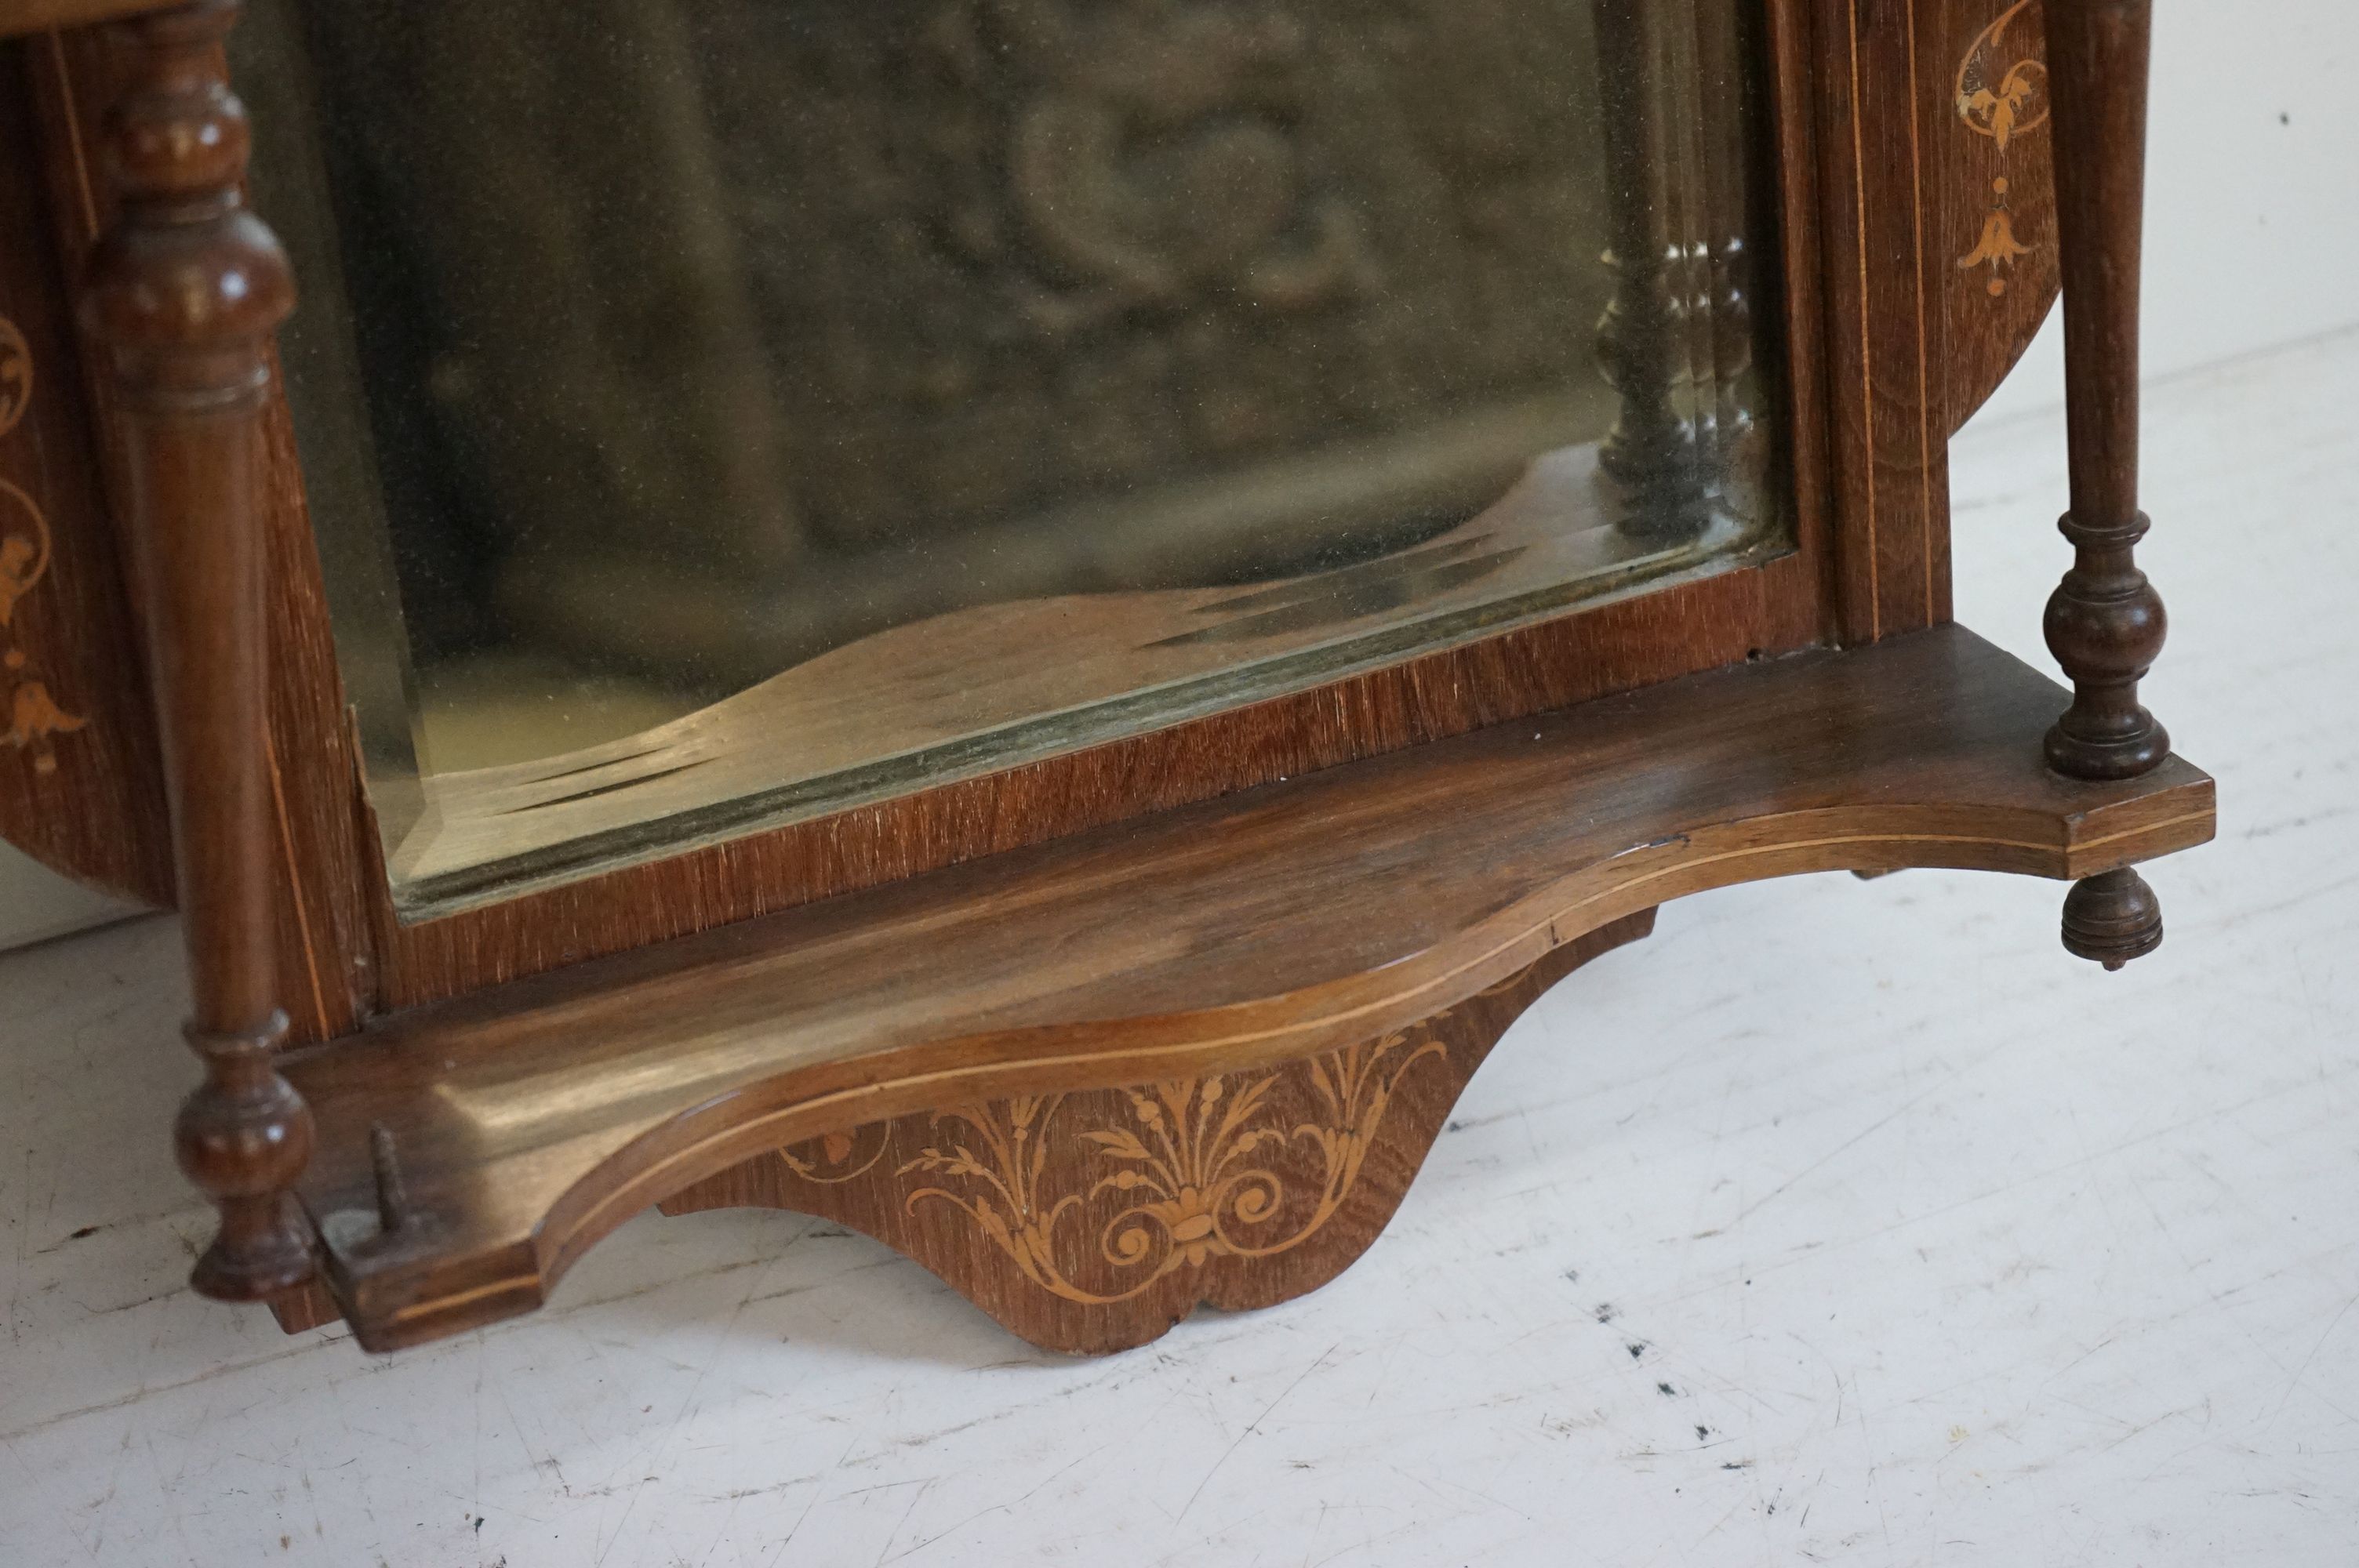 Victorian Walnut and Marquetry Inlaid Combination Hall Mirror and Shelf, 65cm wide x 95cm high - Image 4 of 7